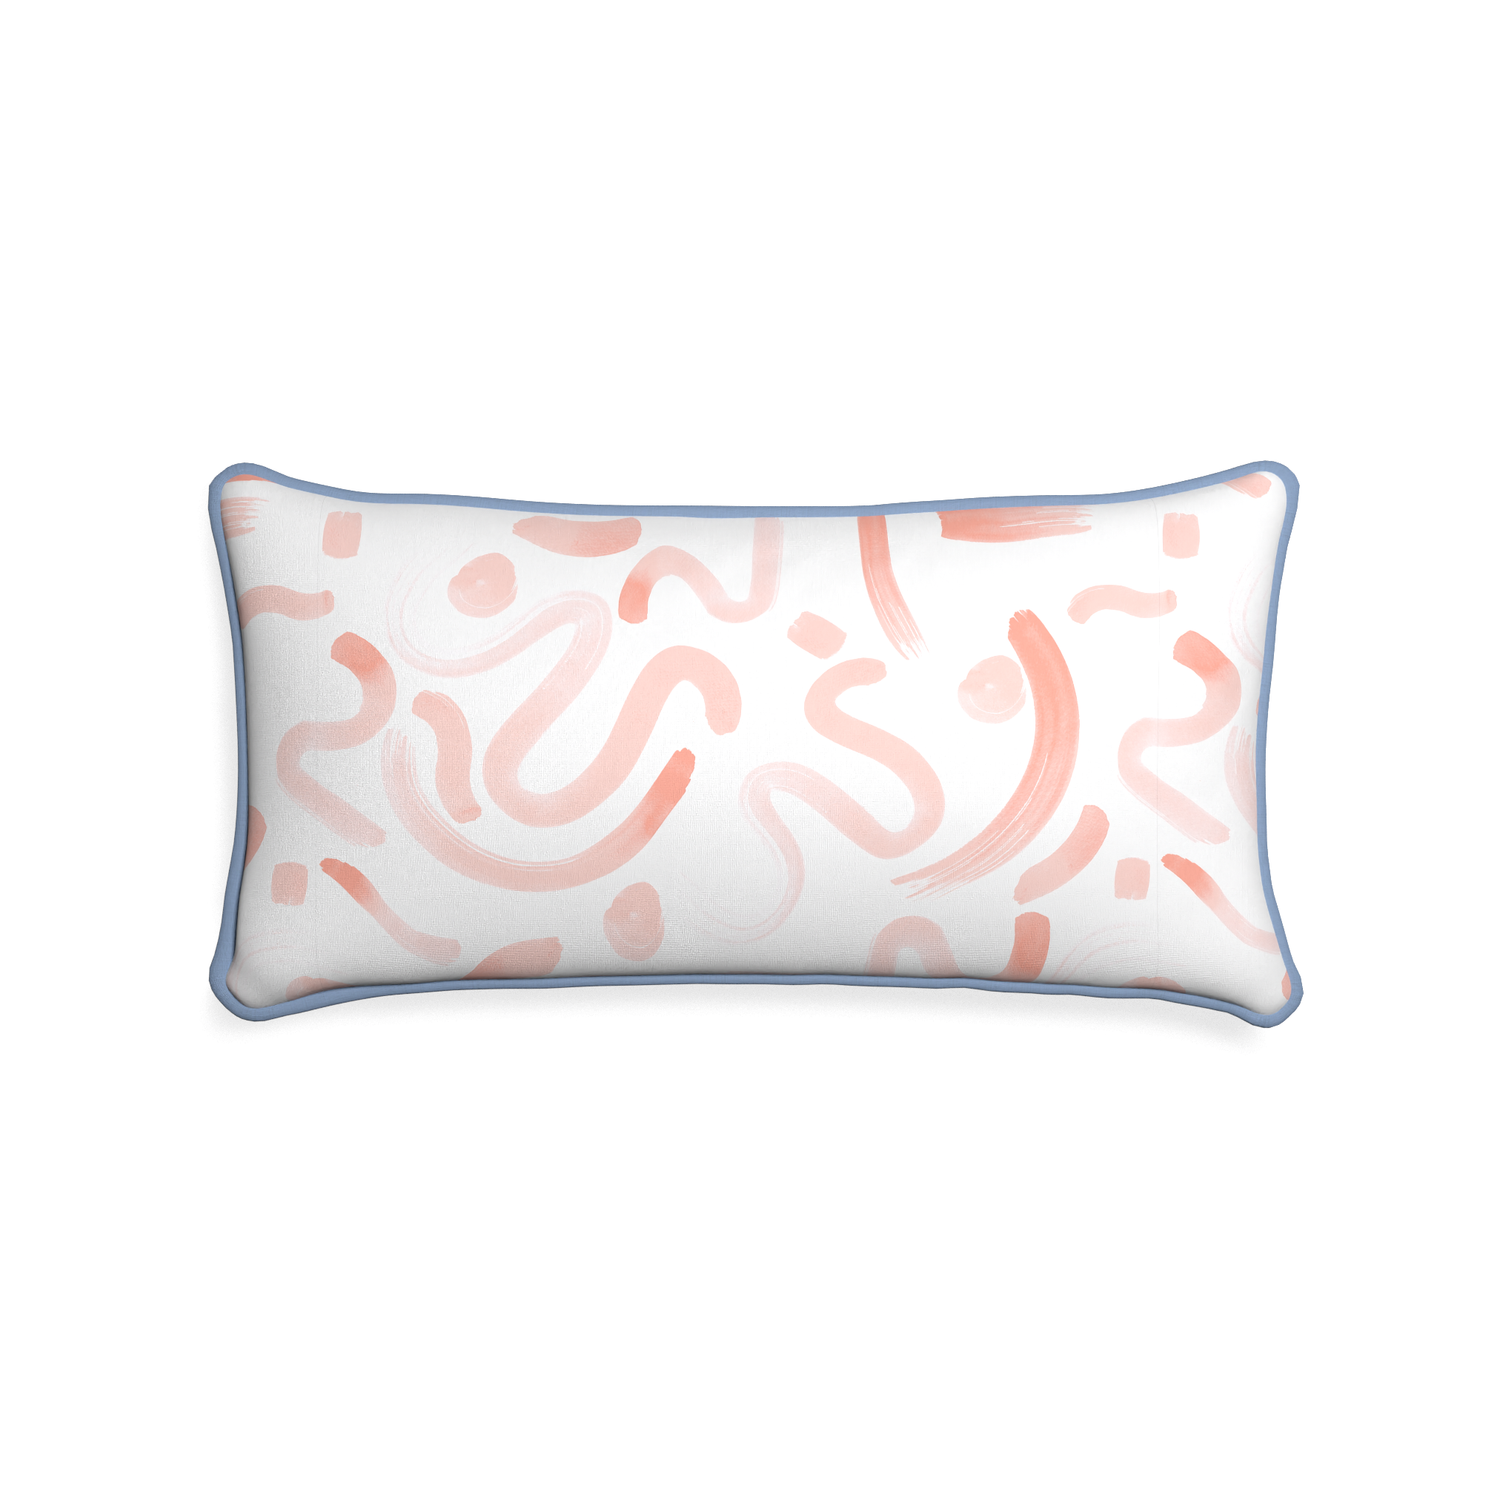 Midi-lumbar hockney pink custom pink graphicpillow with sky piping on white background